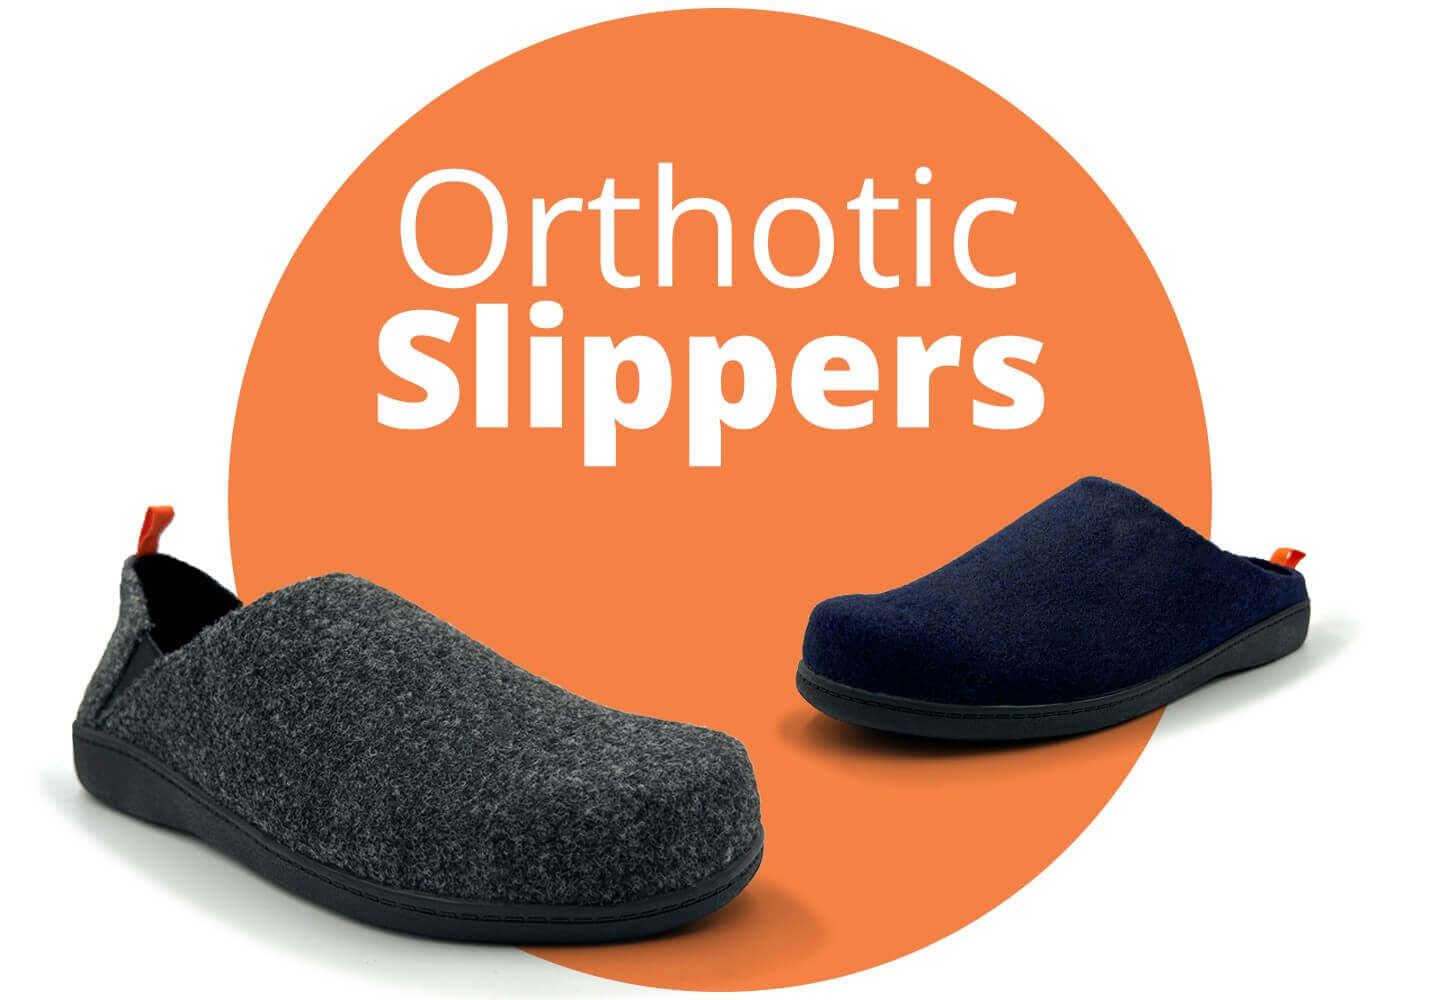 Arch support slippers